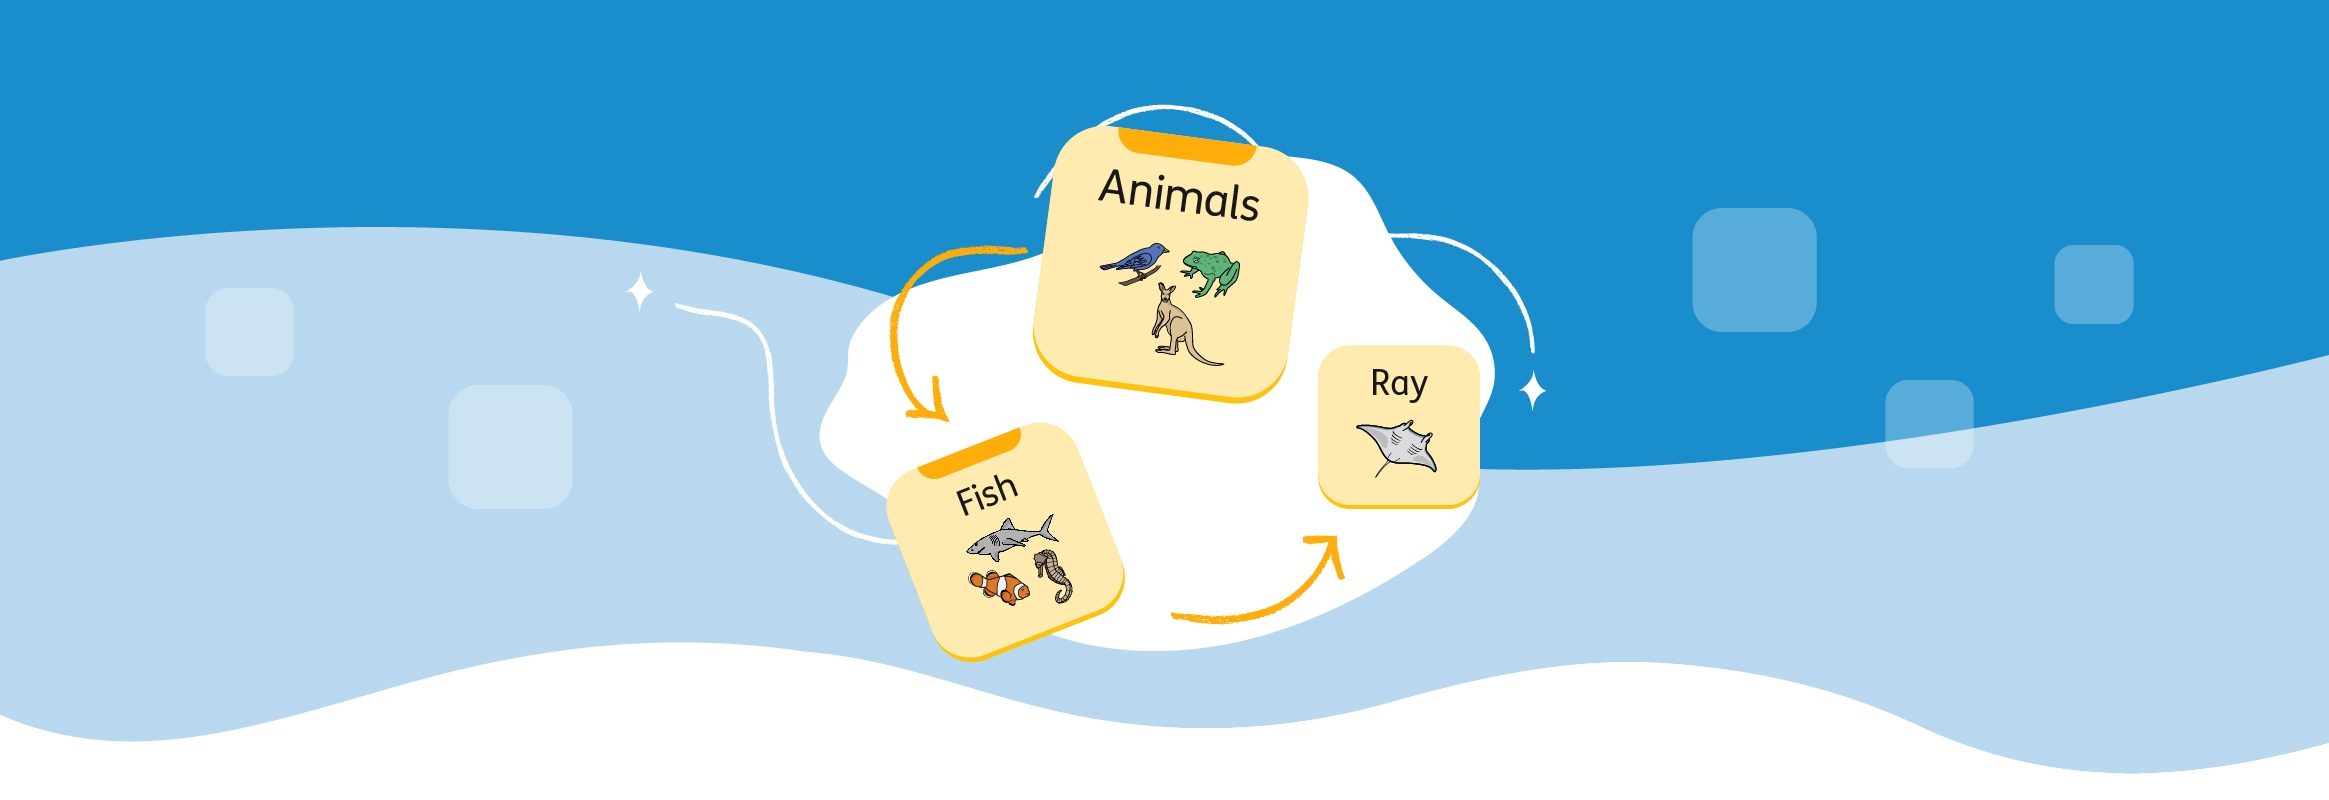 An image of three buttons from AssistiveWare Proloquo - the folders for Animals and Fish and the button Ray (fish)